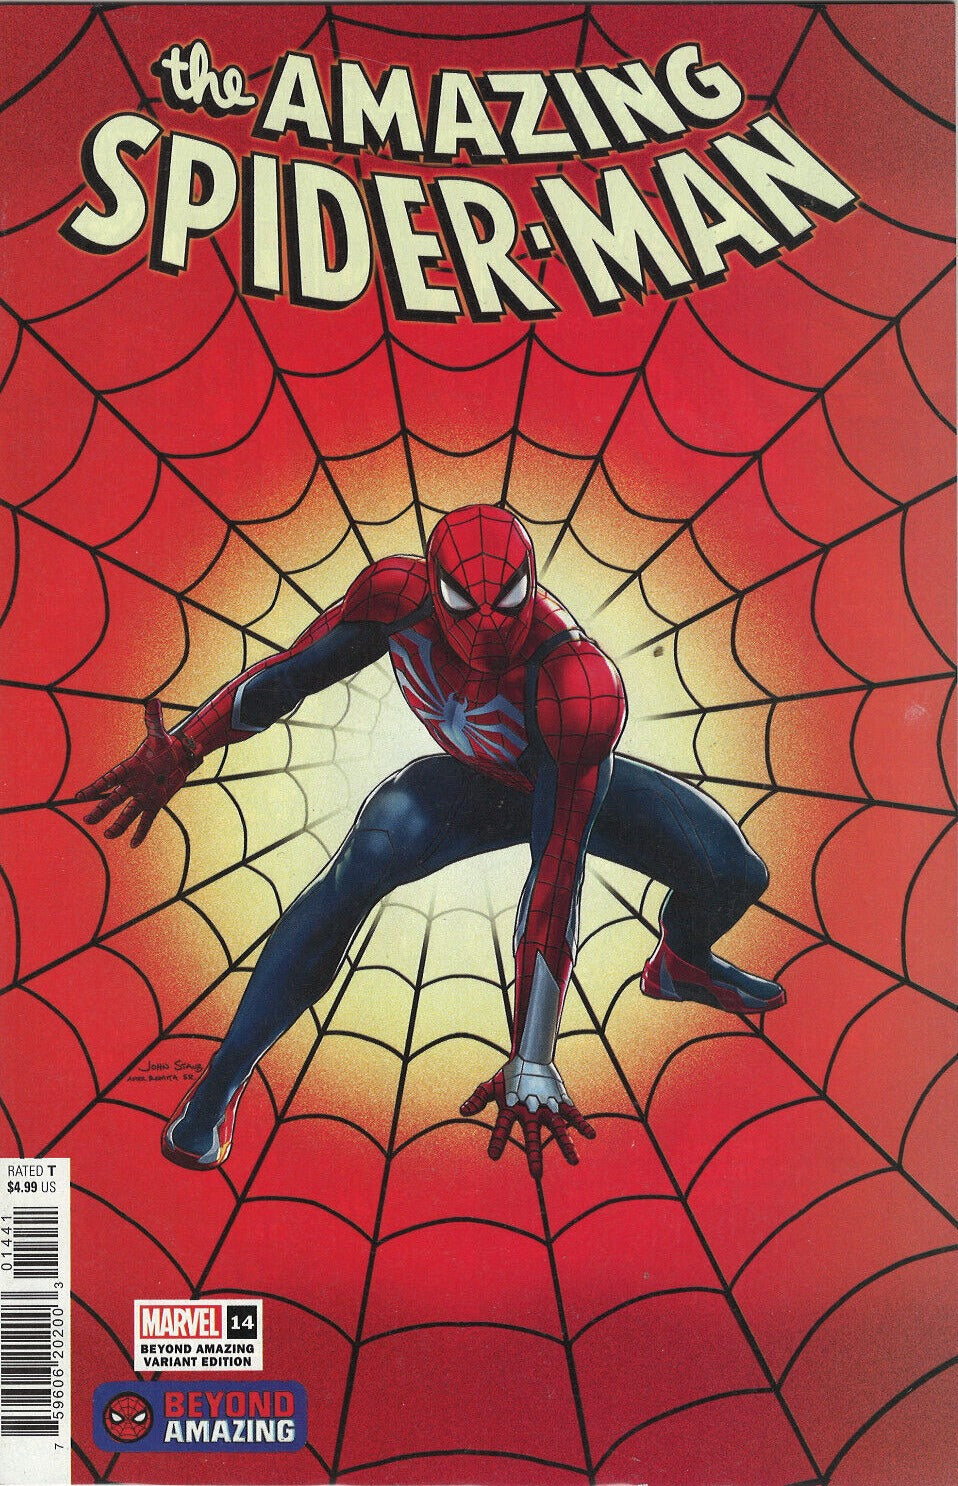 THE AMAZING  SPIDER-MAN  # 14 BEYOND AMAZING VARIANT EDITION 1ST APP HALLOWS' EVE  MARVEL COMIC BOOK 2022